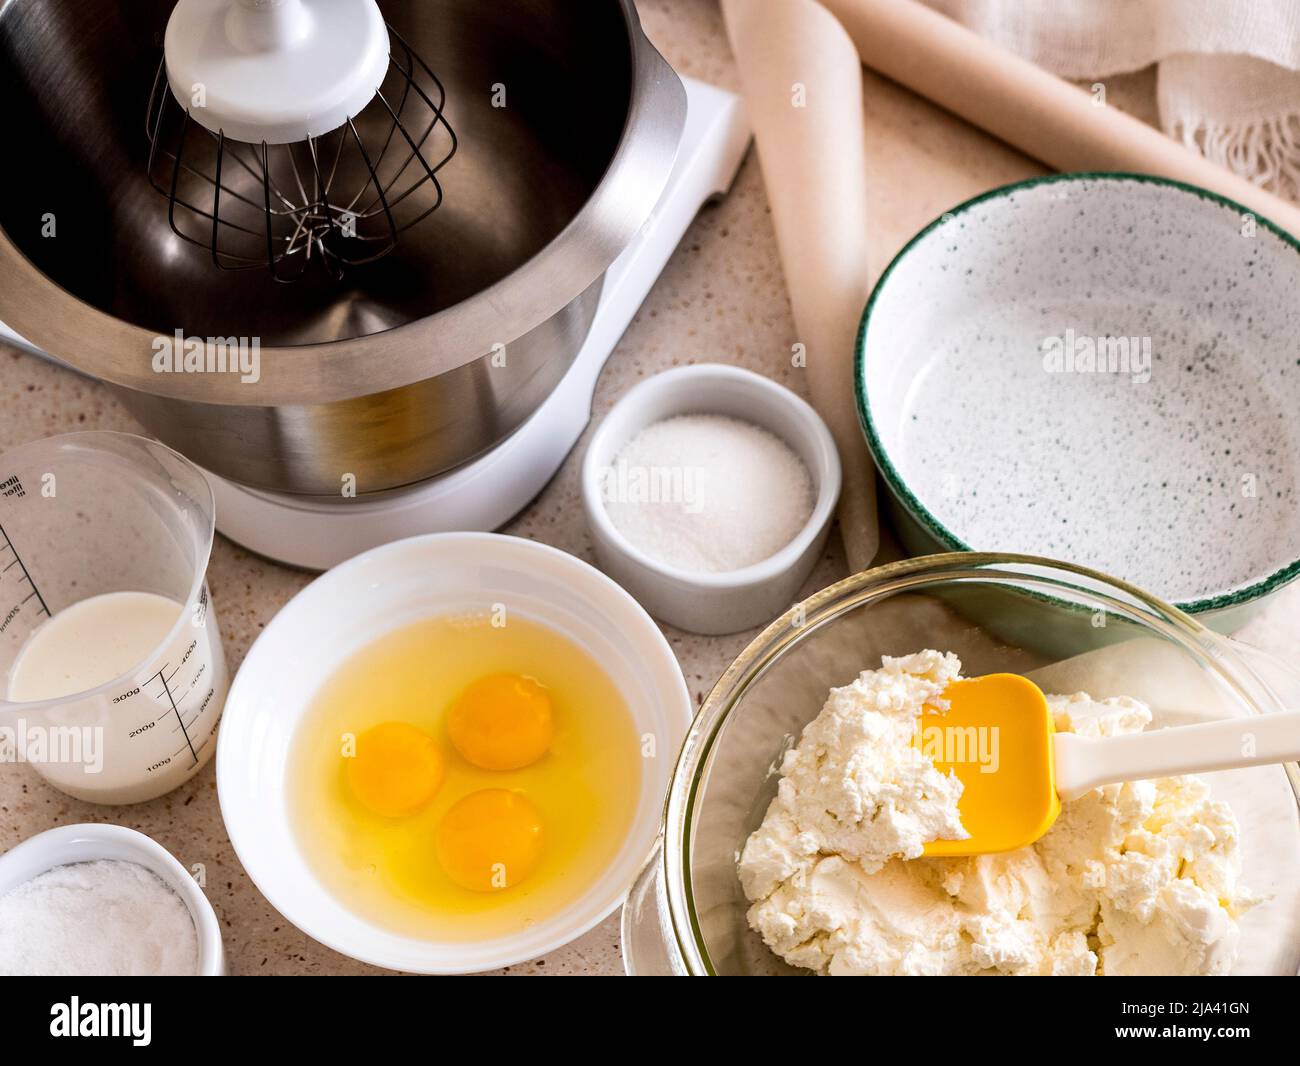 Ingredients for making cheesecake: eggs, cheese, sugar, dairy cream. Home cooking during the quarantine, selective focus Stock Photo